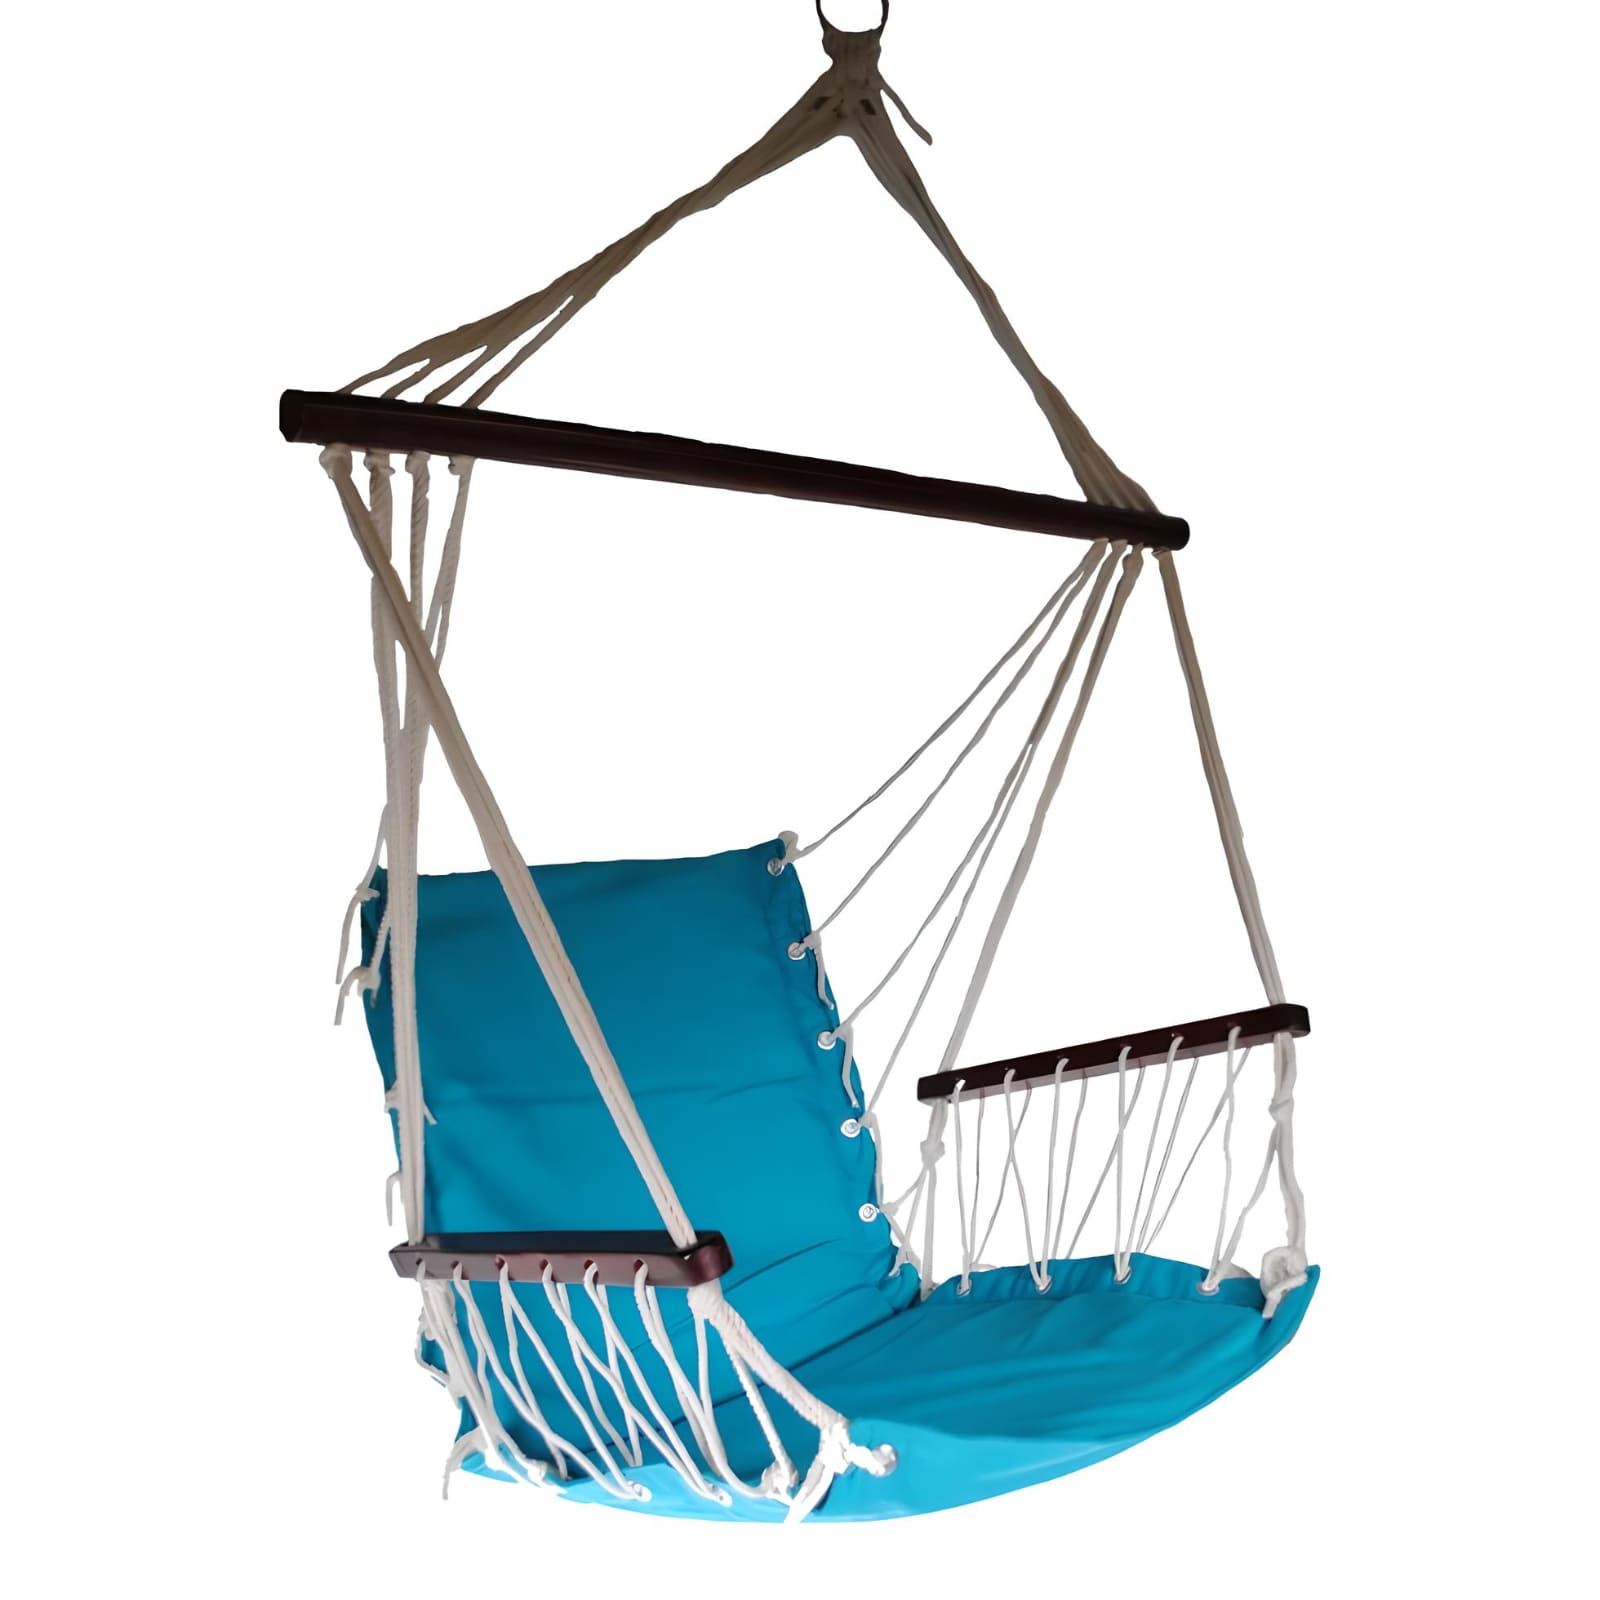 blue-in-hanging-hammock-chair-with-wooden-arm-rests